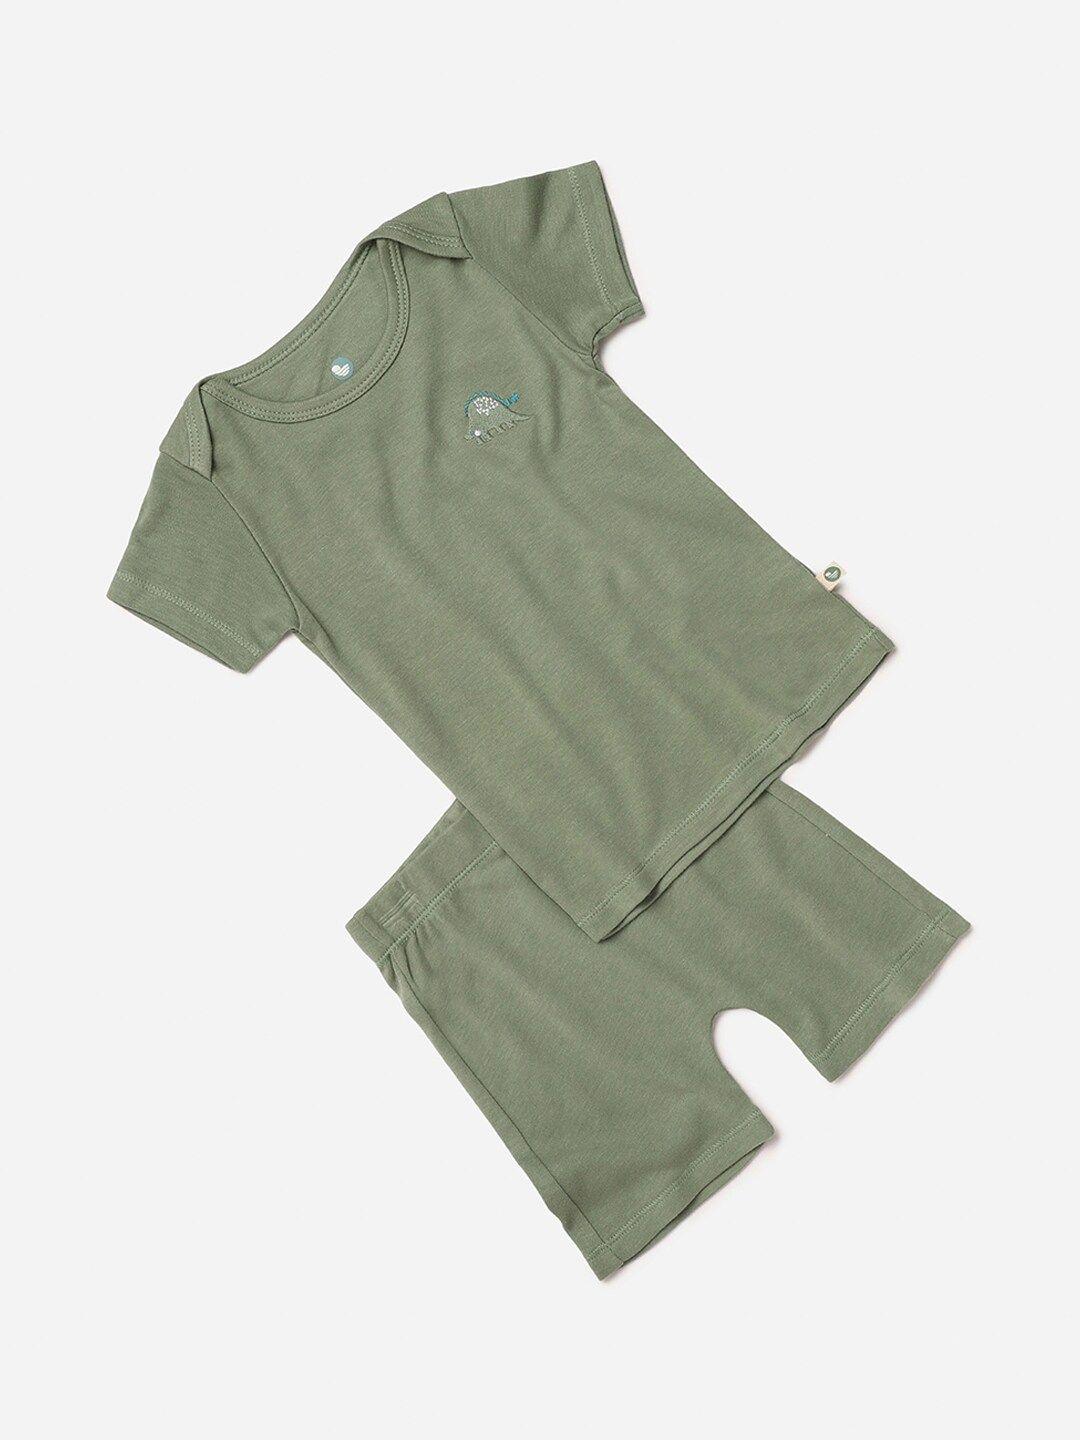 cocoon care Unisex Kids Green Sustainable Clothing Set